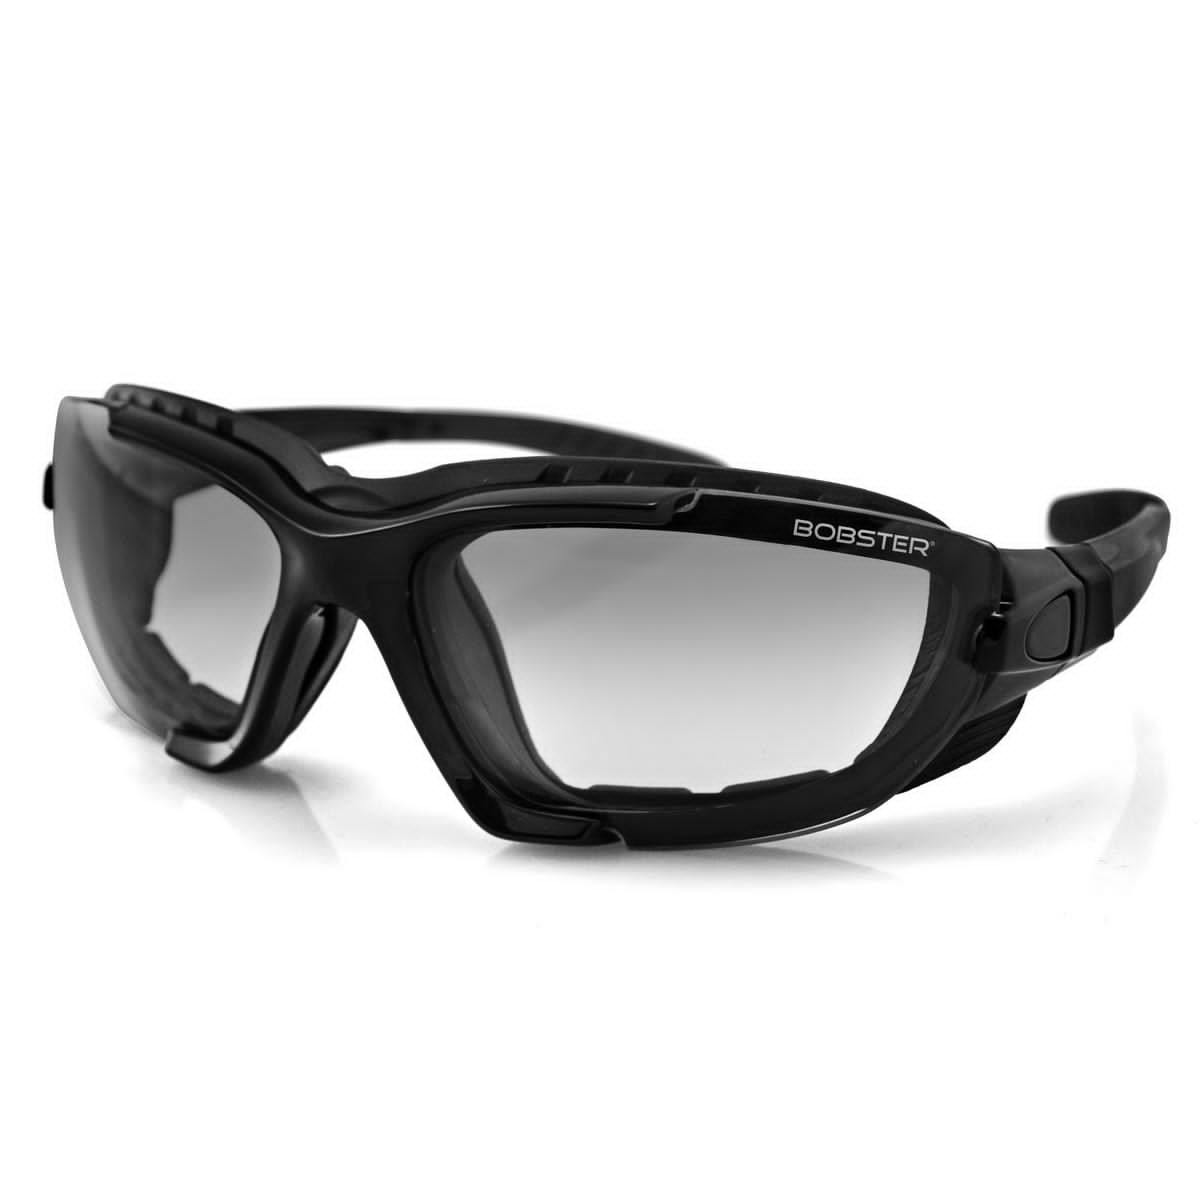 Bobster Renegade Convertible Riding Goggles - American Legend Rider